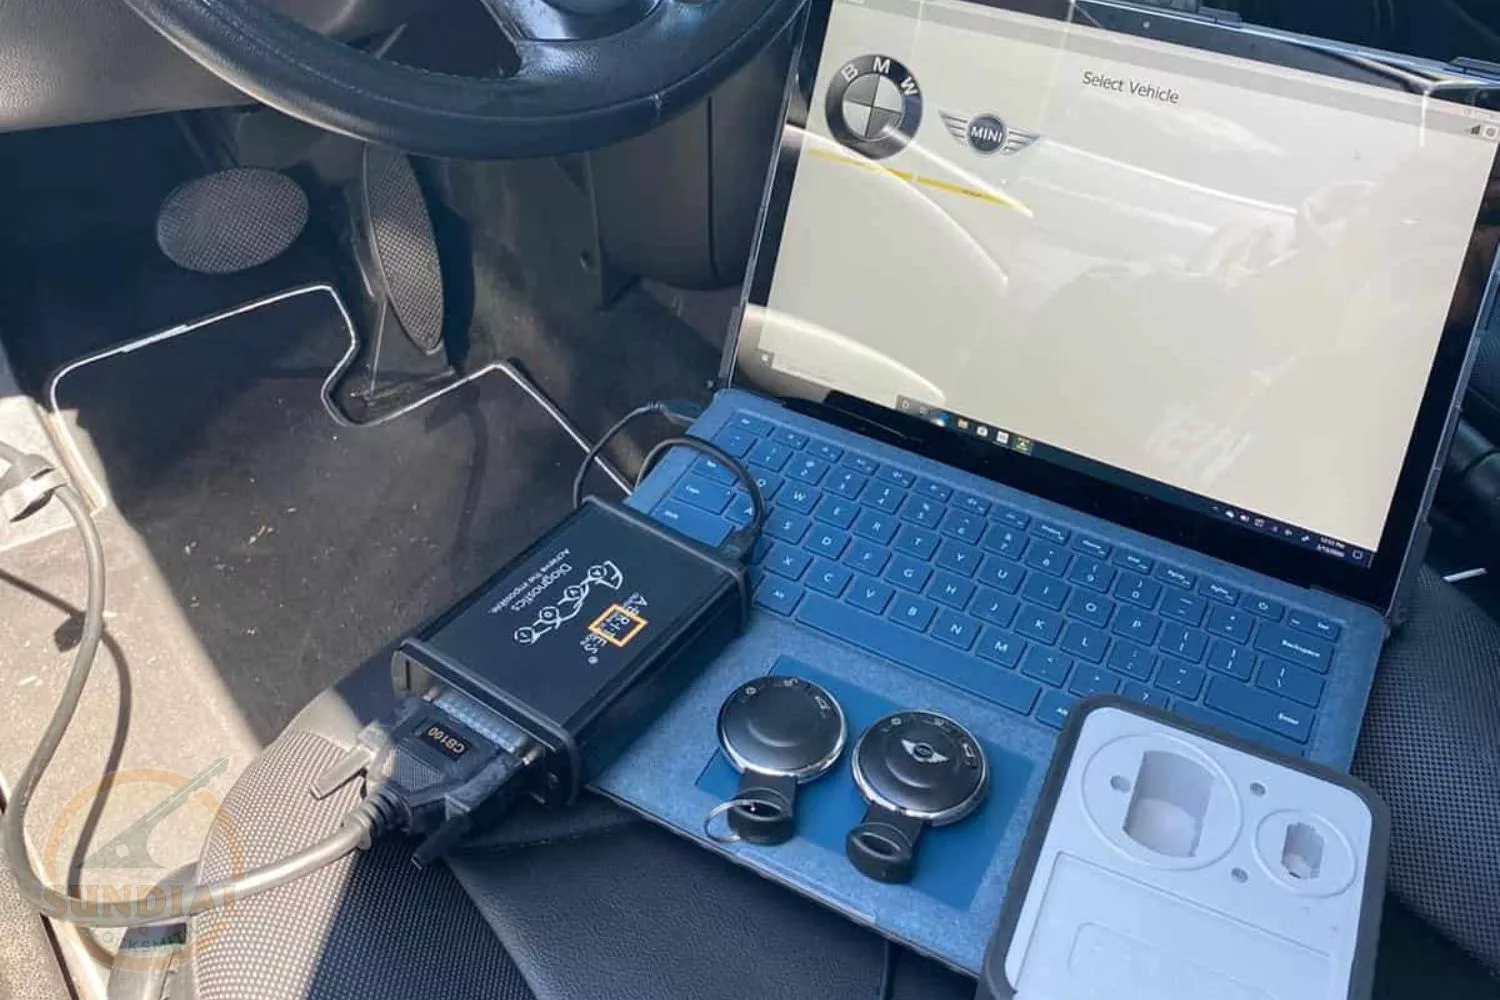 Laptop and diagnostic tools in car for vehicle servicing.